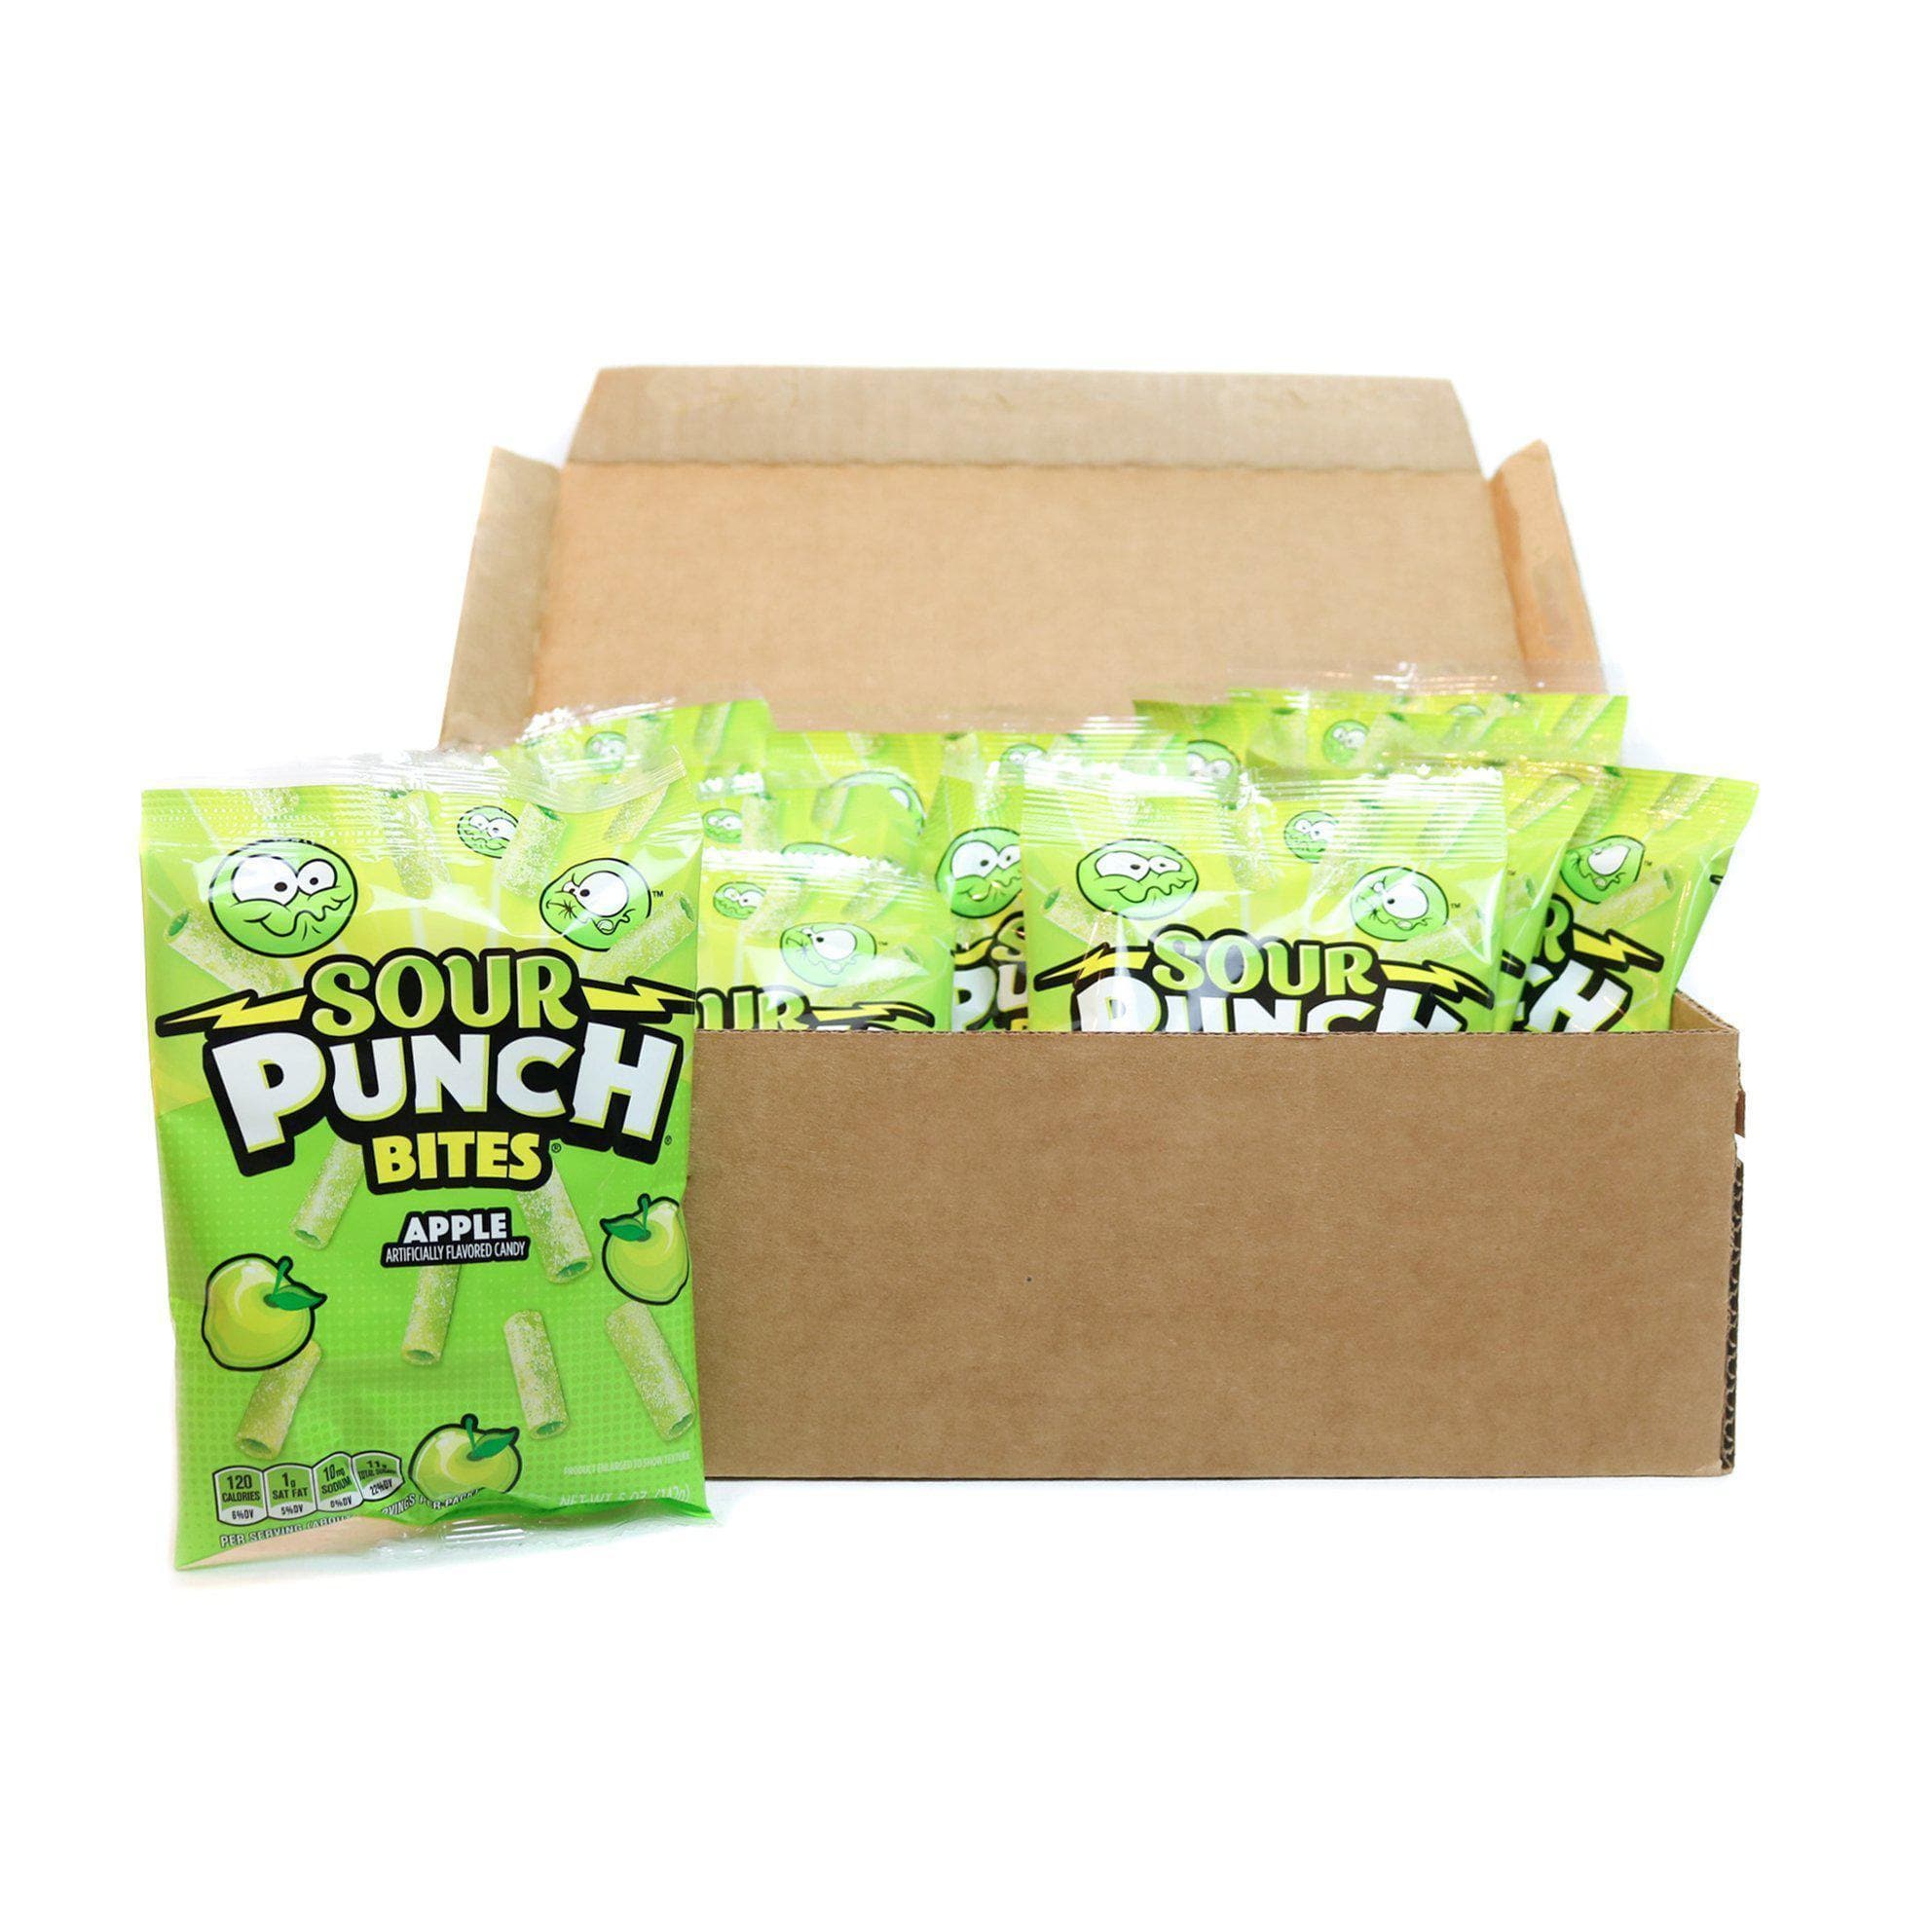 12 Count box of Sour Punch Bites Green Apple Candy 5oz bags